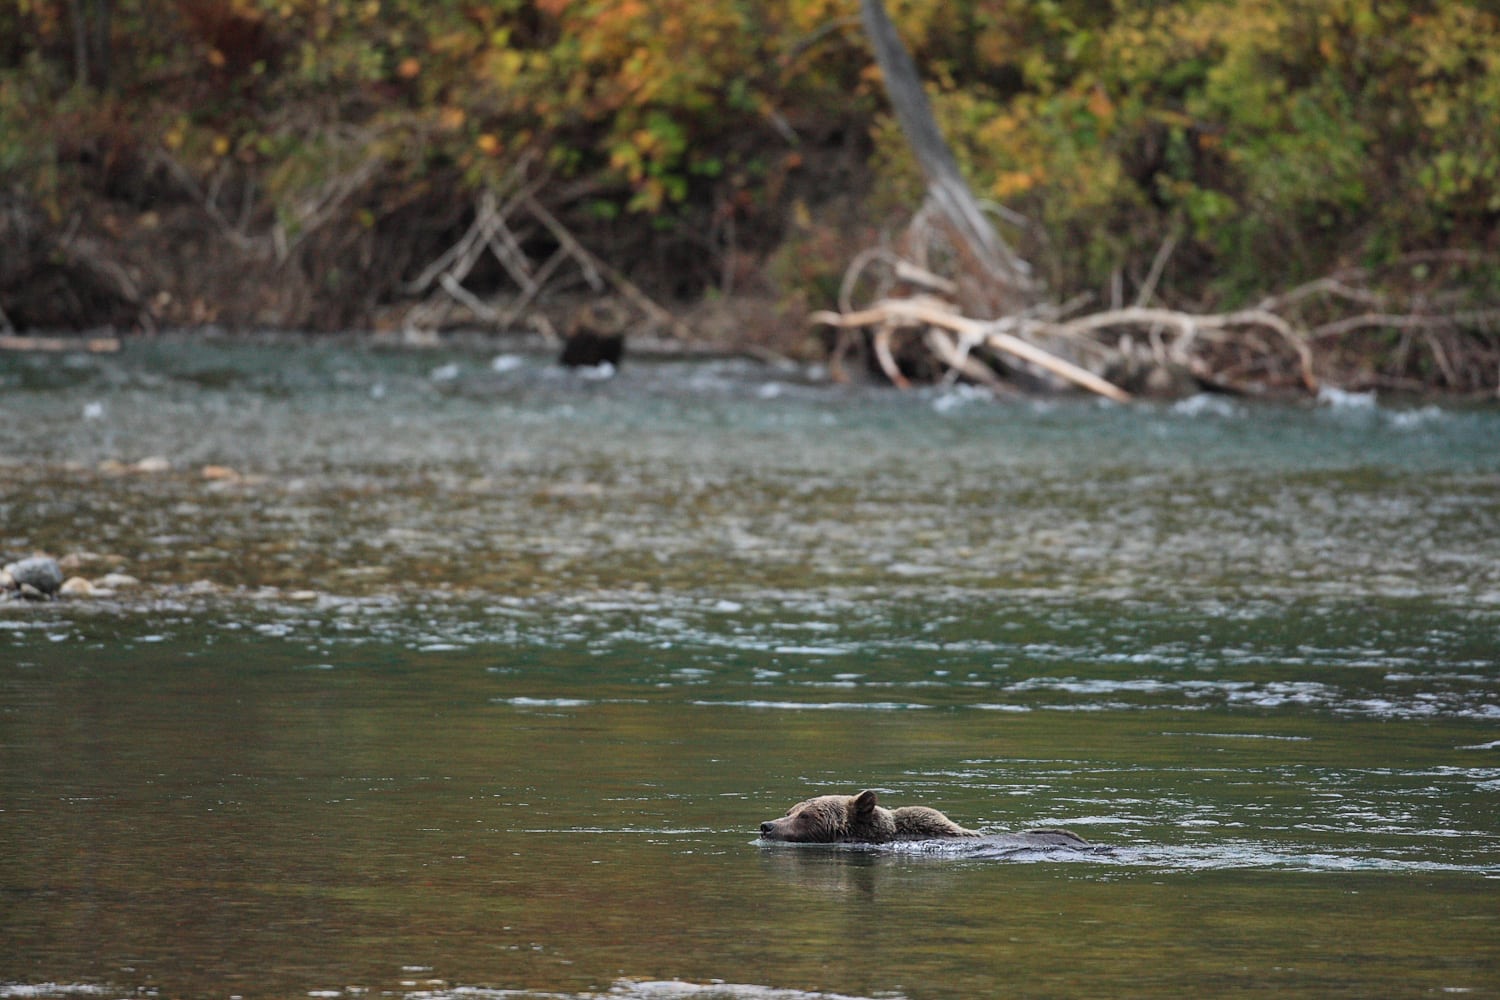 A grizzly bear swimming at Wild Bear Lodge